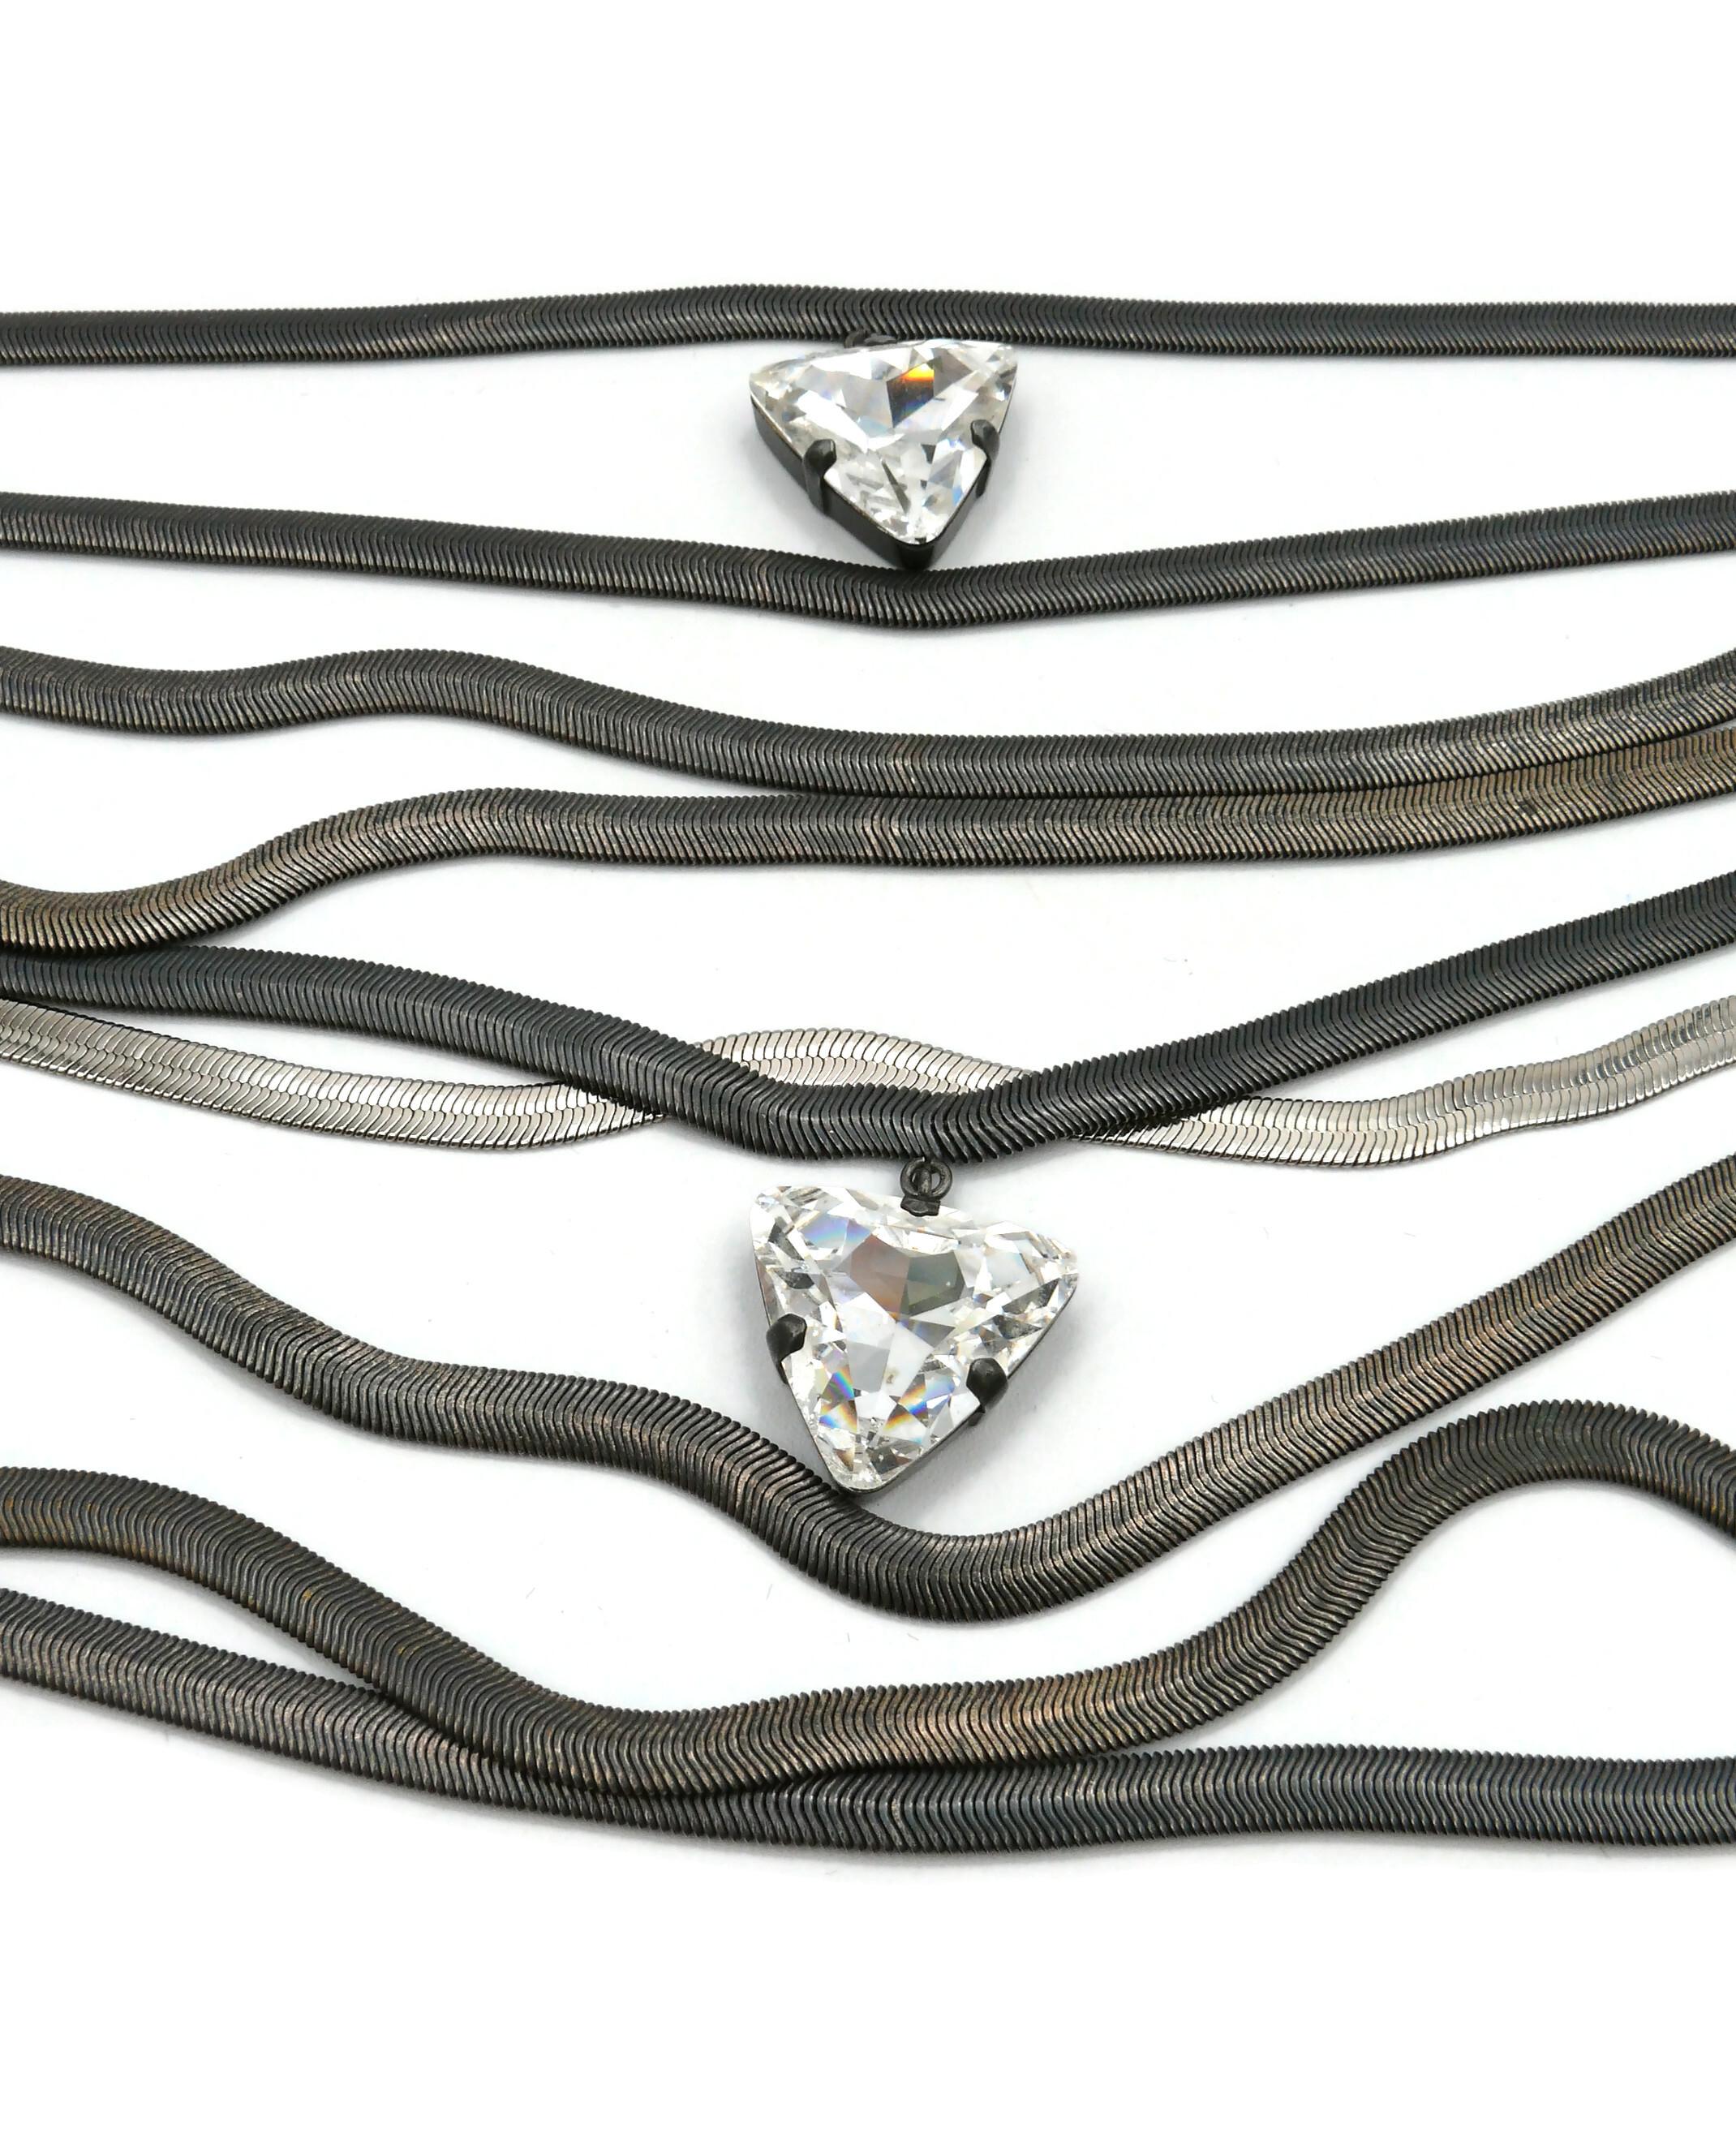 YVES SAINT LAURENT YSL Rive Gauche Vintage Multi-Strand Snake Chains Necklace In Good Condition For Sale In Nice, FR